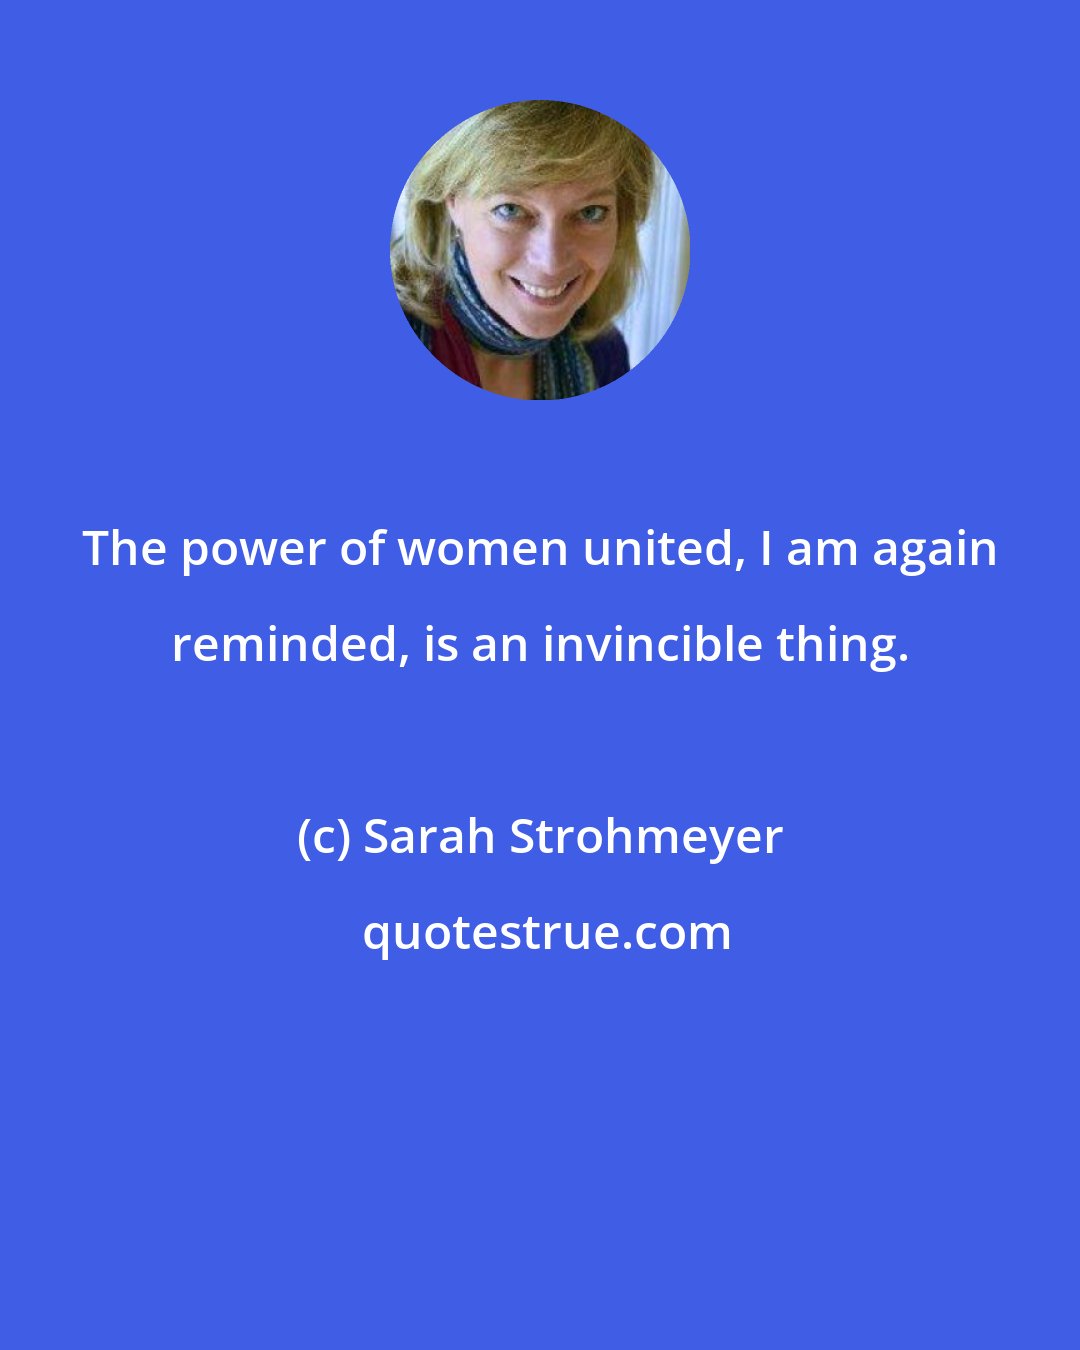 Sarah Strohmeyer: The power of women united, I am again reminded, is an invincible thing.